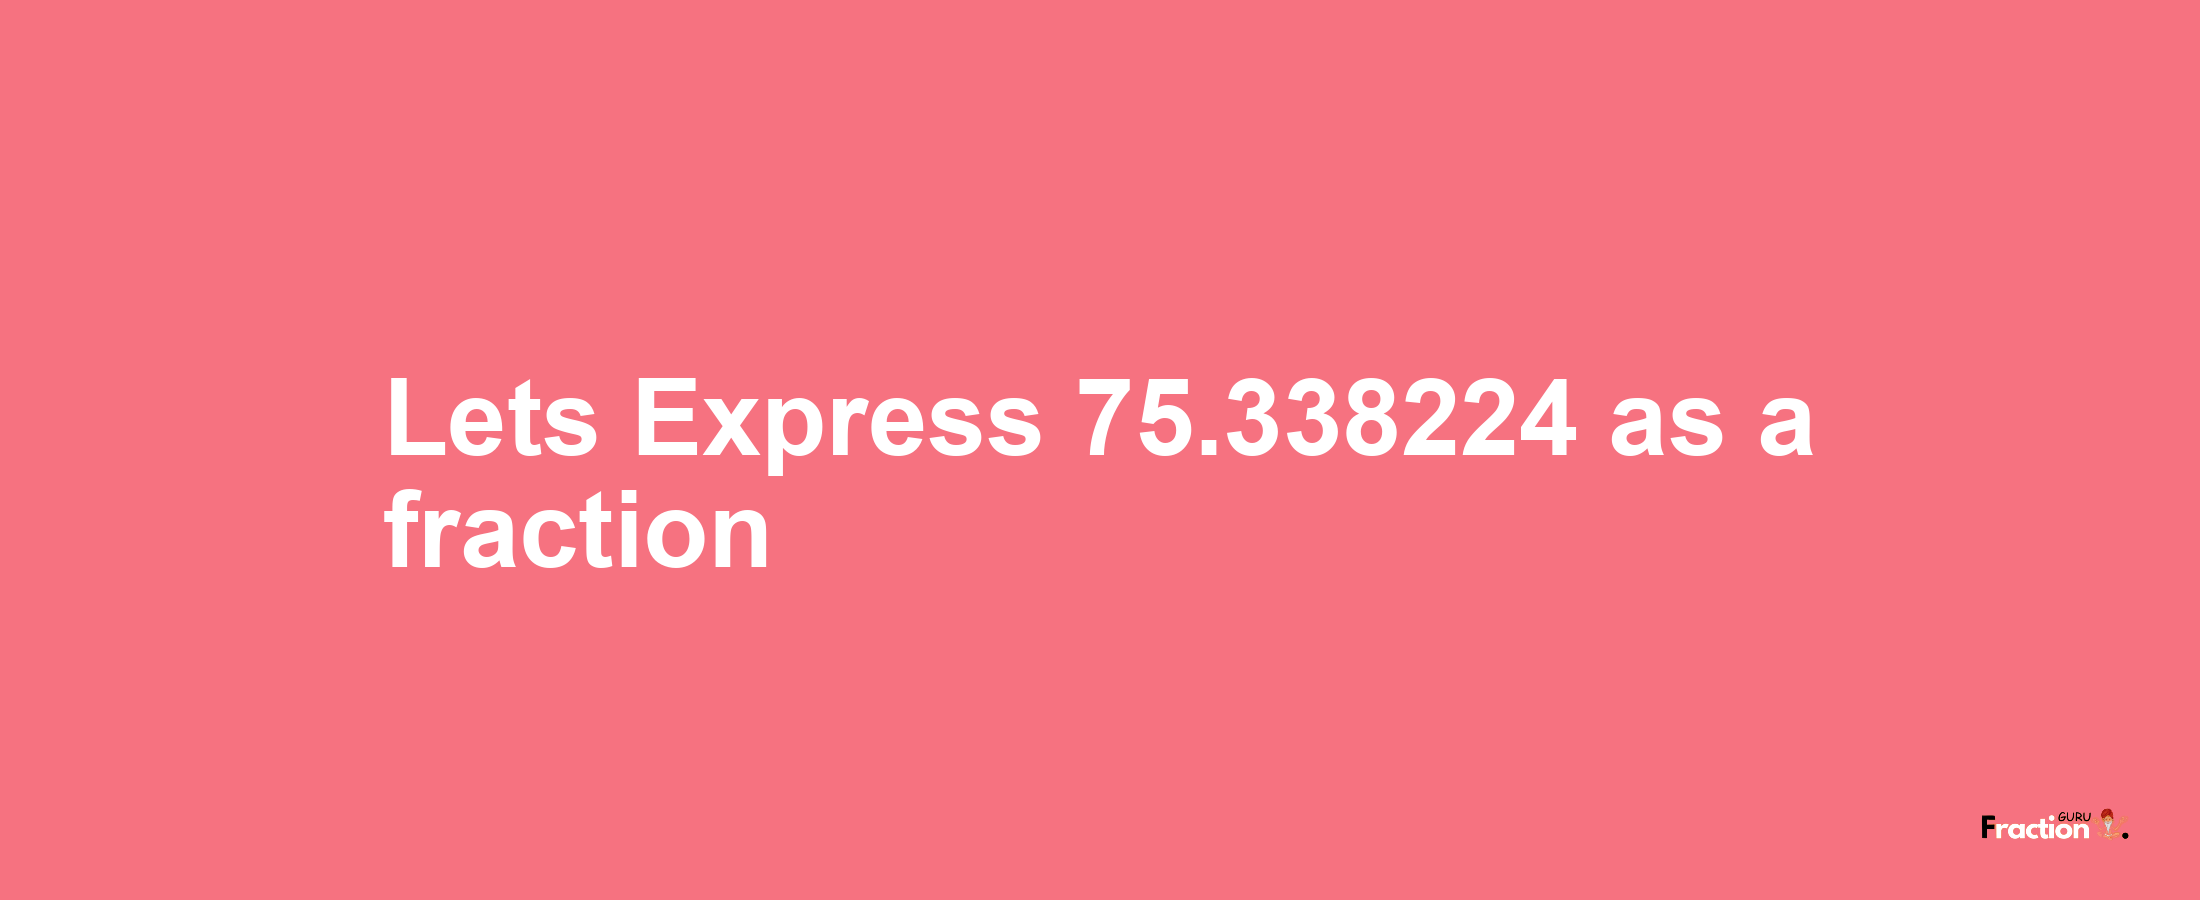 Lets Express 75.338224 as afraction